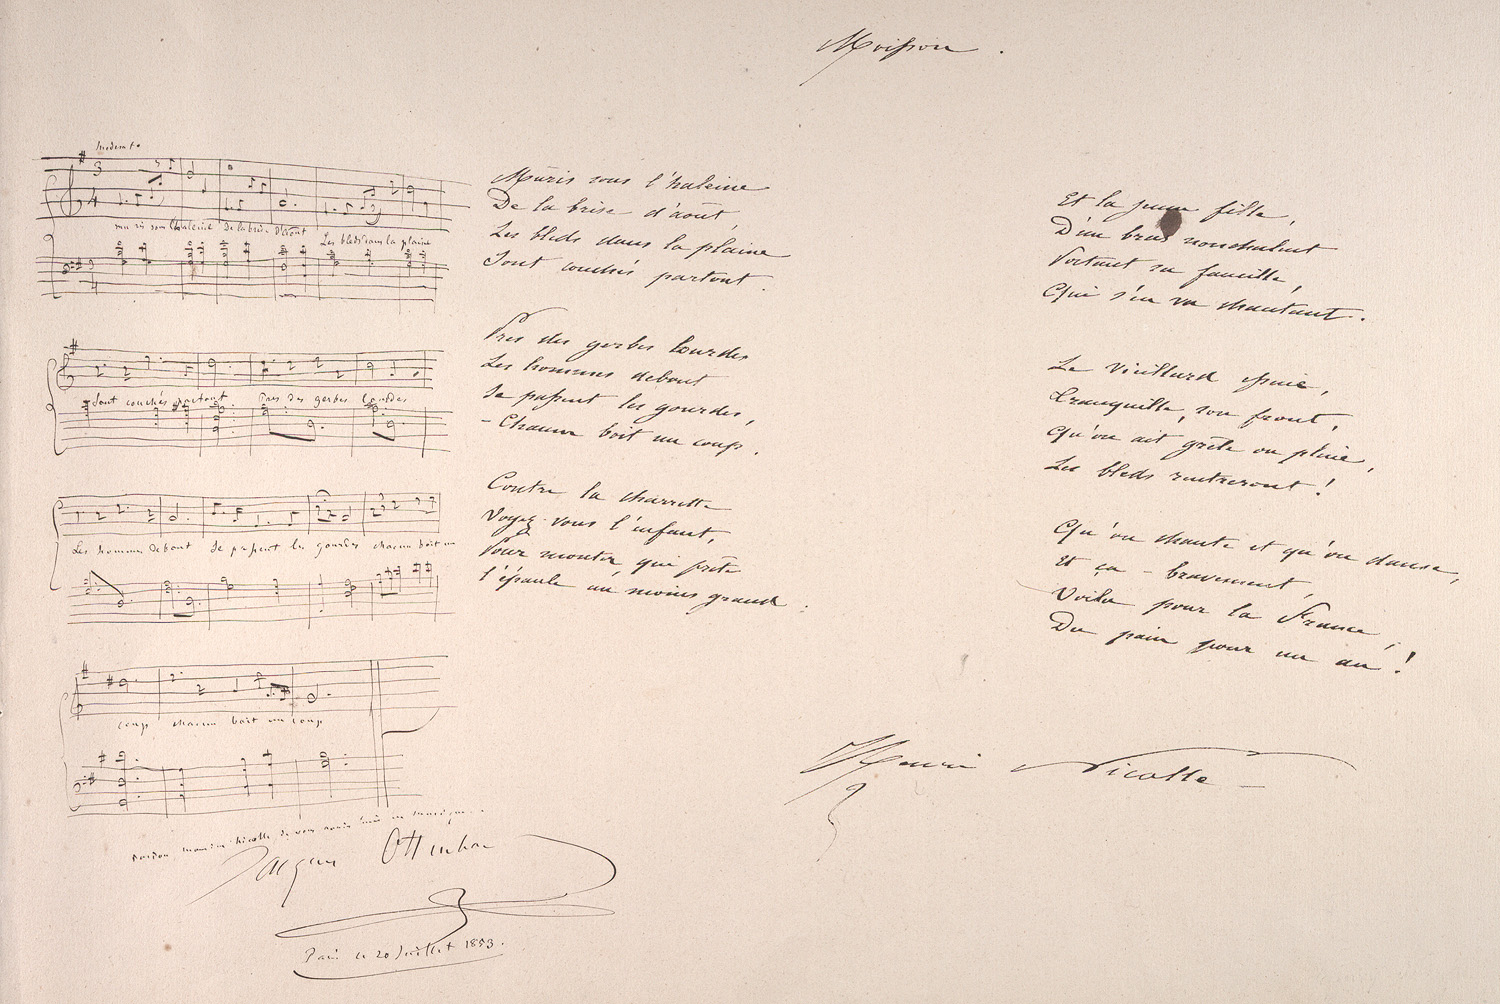  Poem by Henri Nicolle; set by Jacques Offenbach